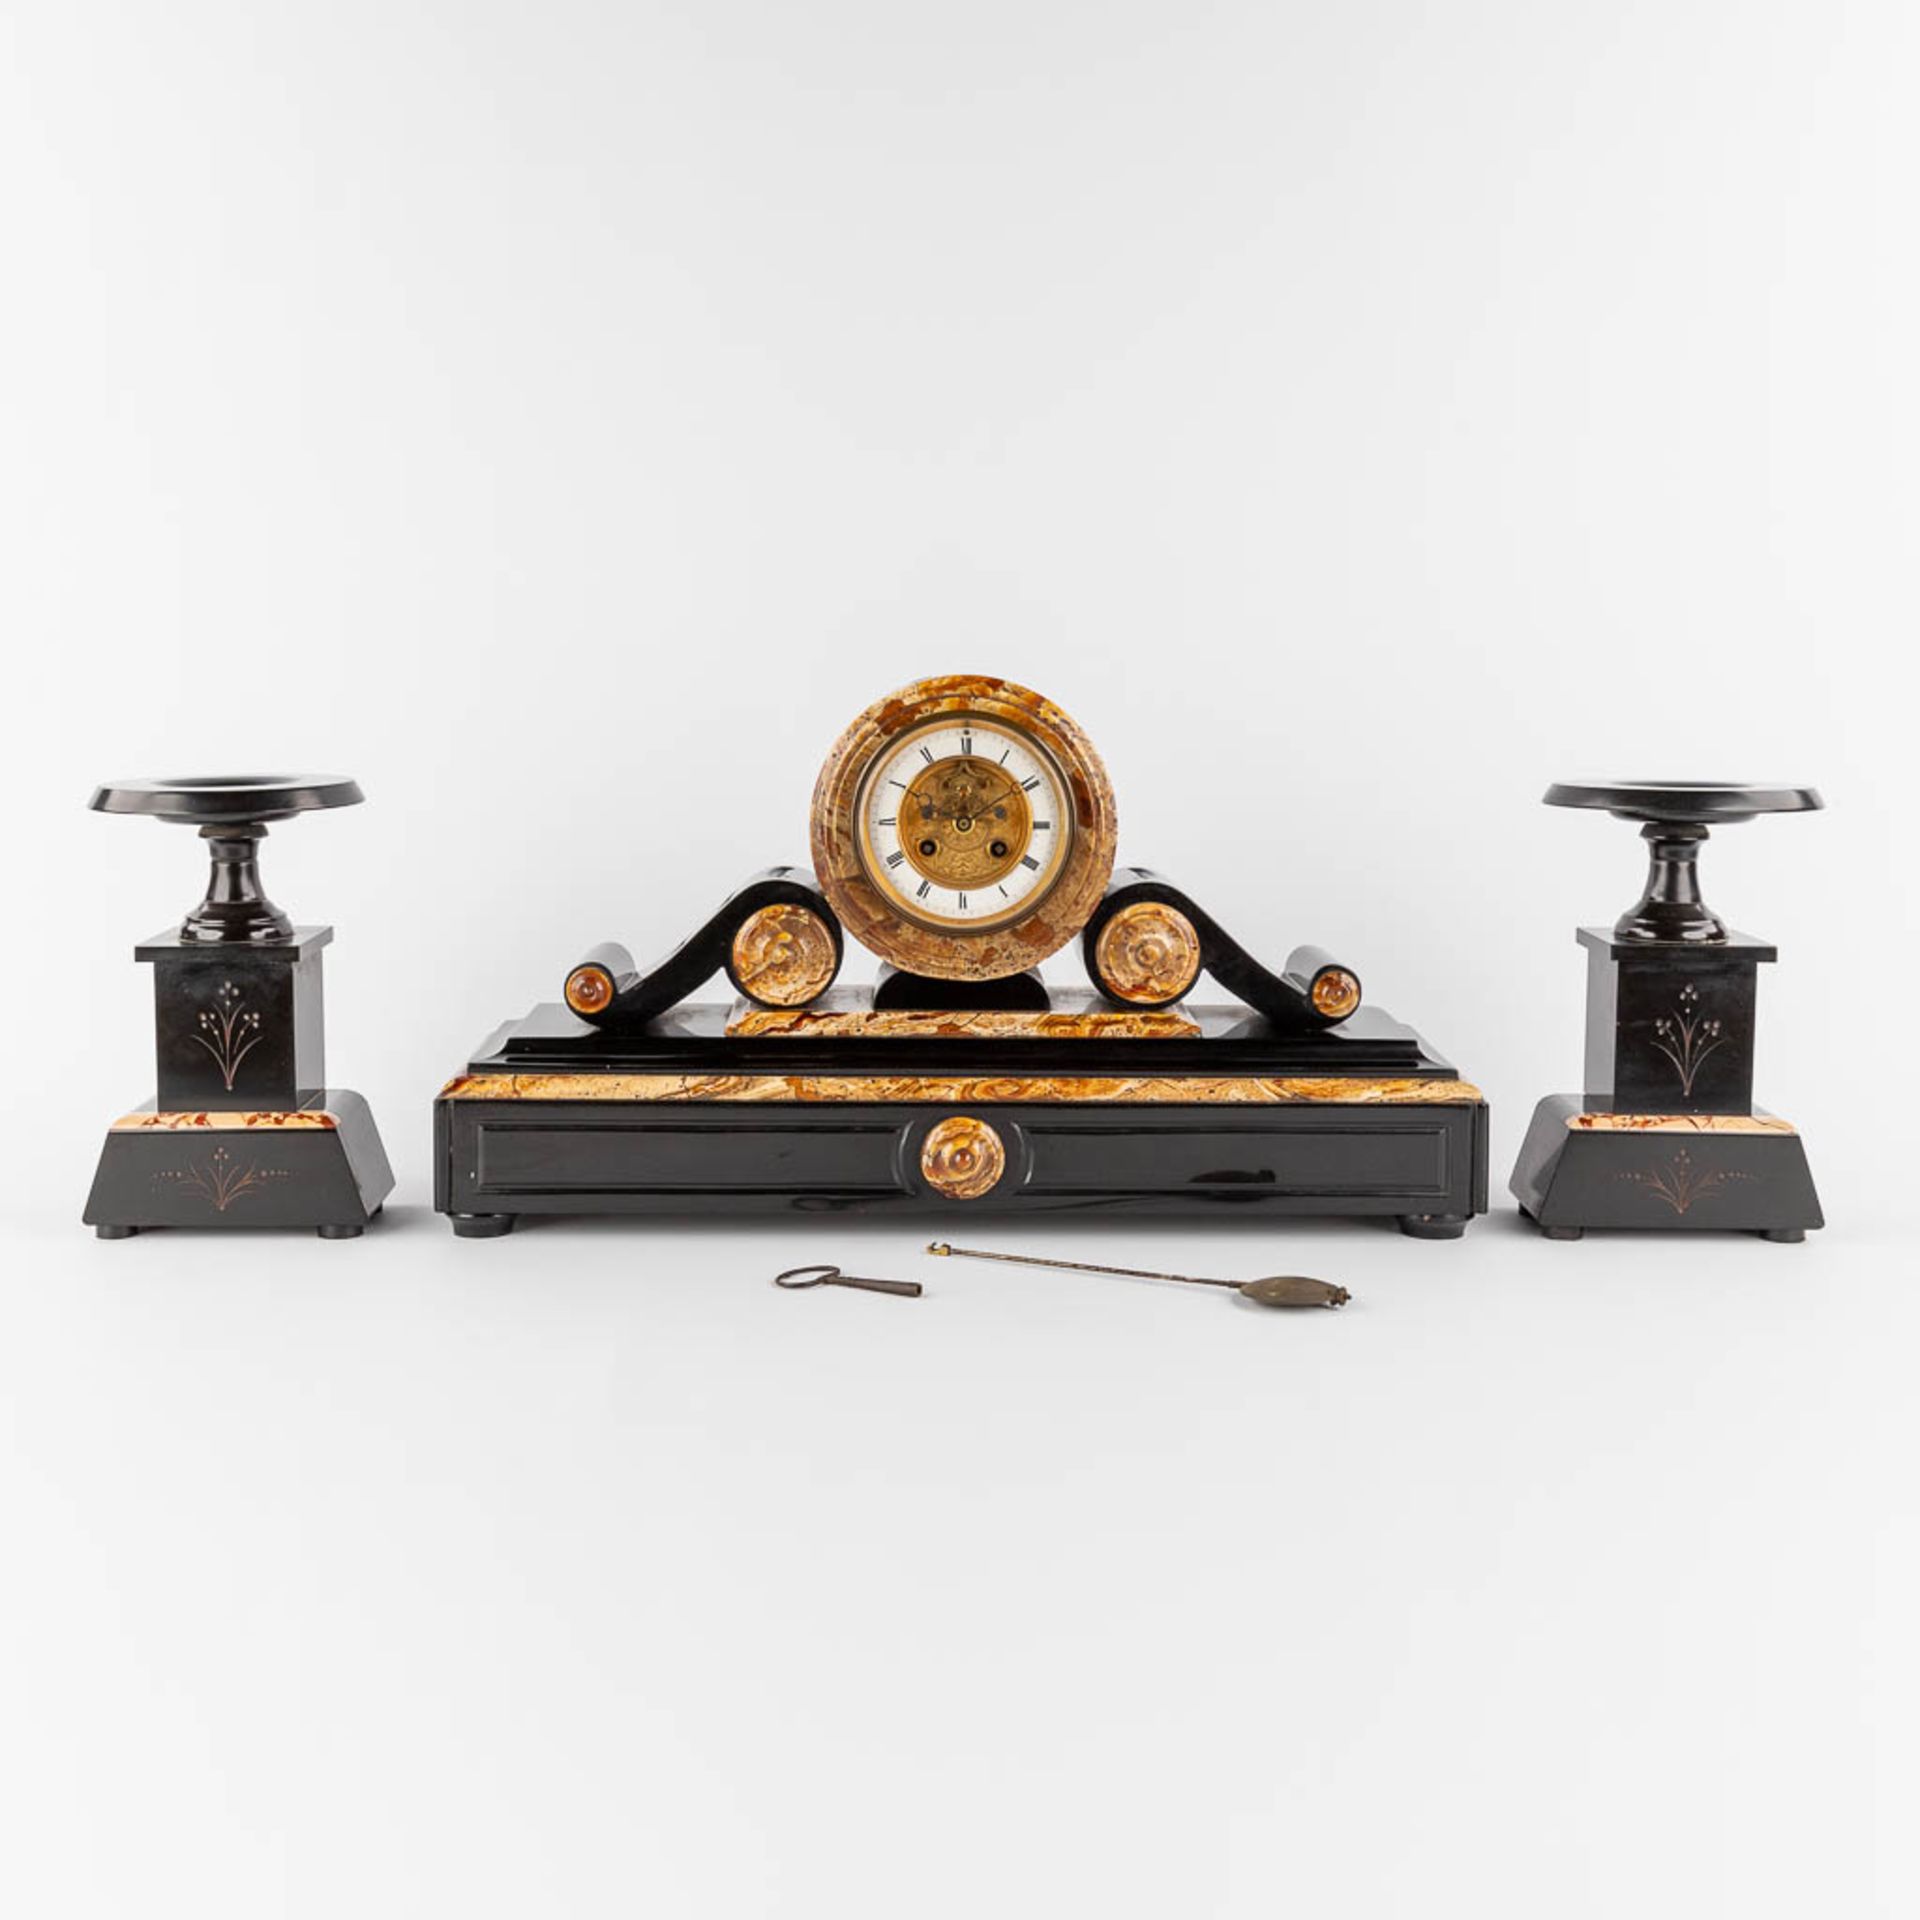 A three-piece mantle garniture clock and side pieces, marble. Circa 1900. (D:15 x W:54 x H:30 cm)